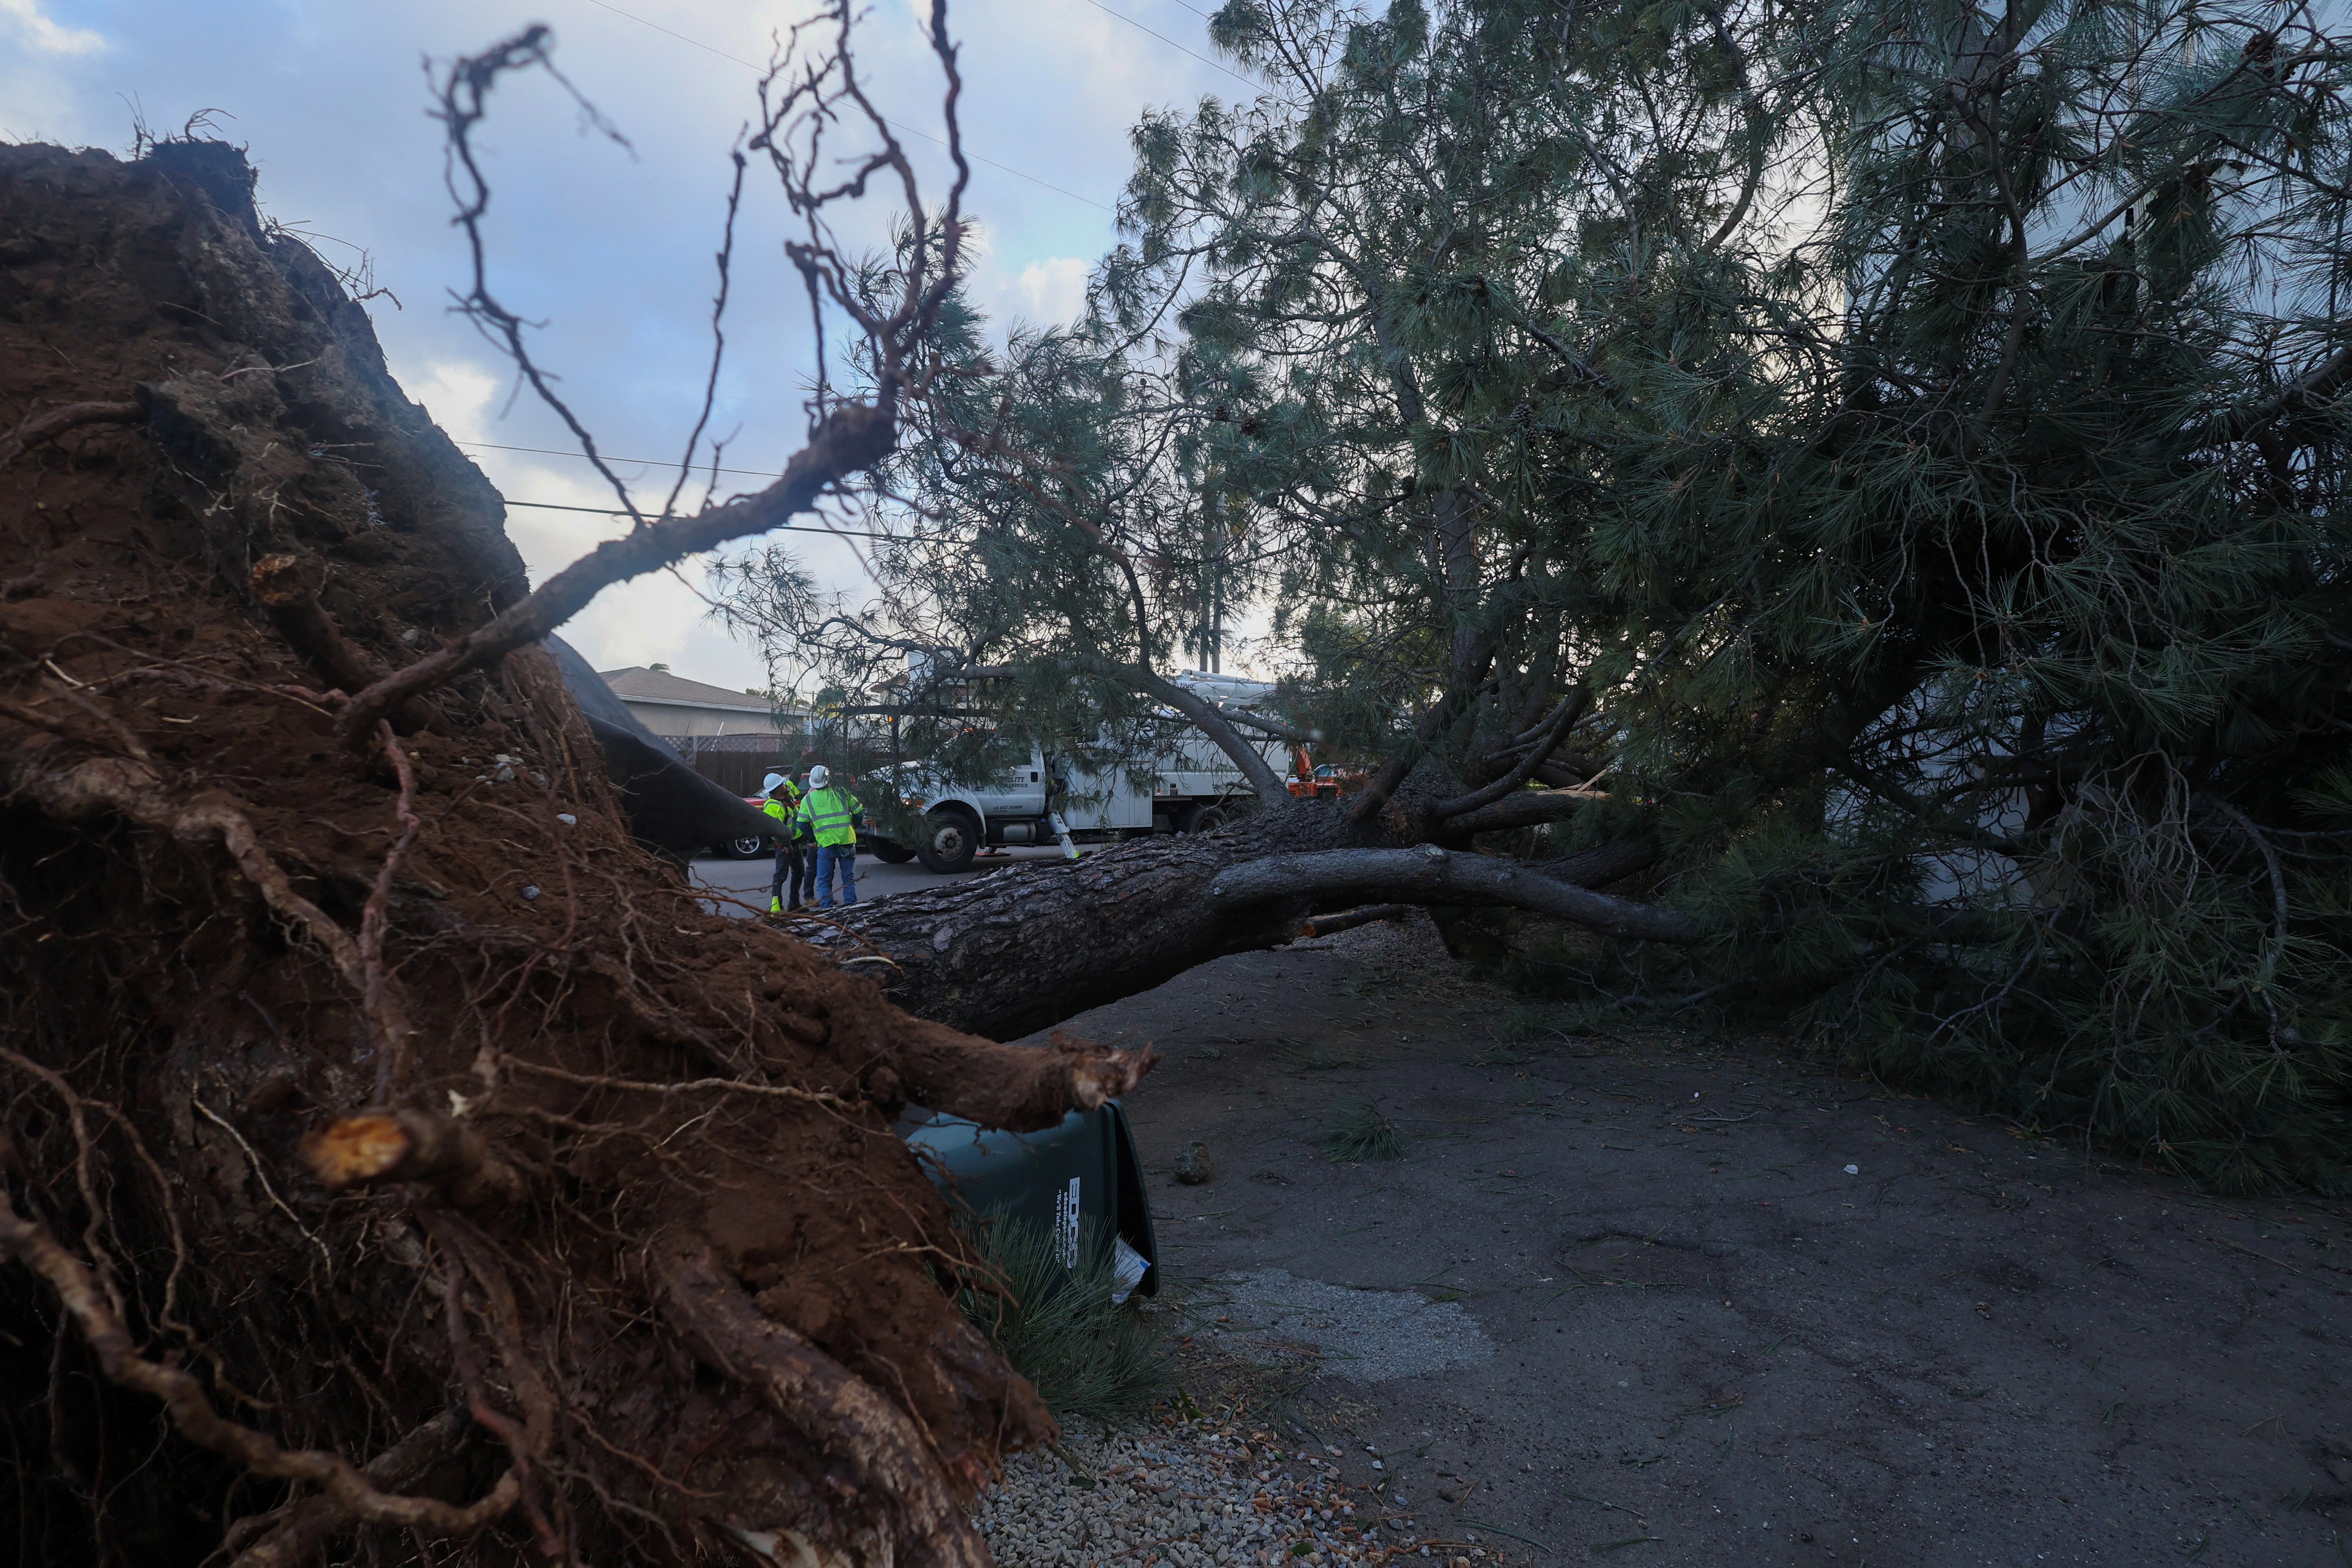 Emergency workers assess the damage after a large tree was blown into an apartment building during a winter storm in San Diego in southern California on Wednesday (REUTERS/Mike Blake)